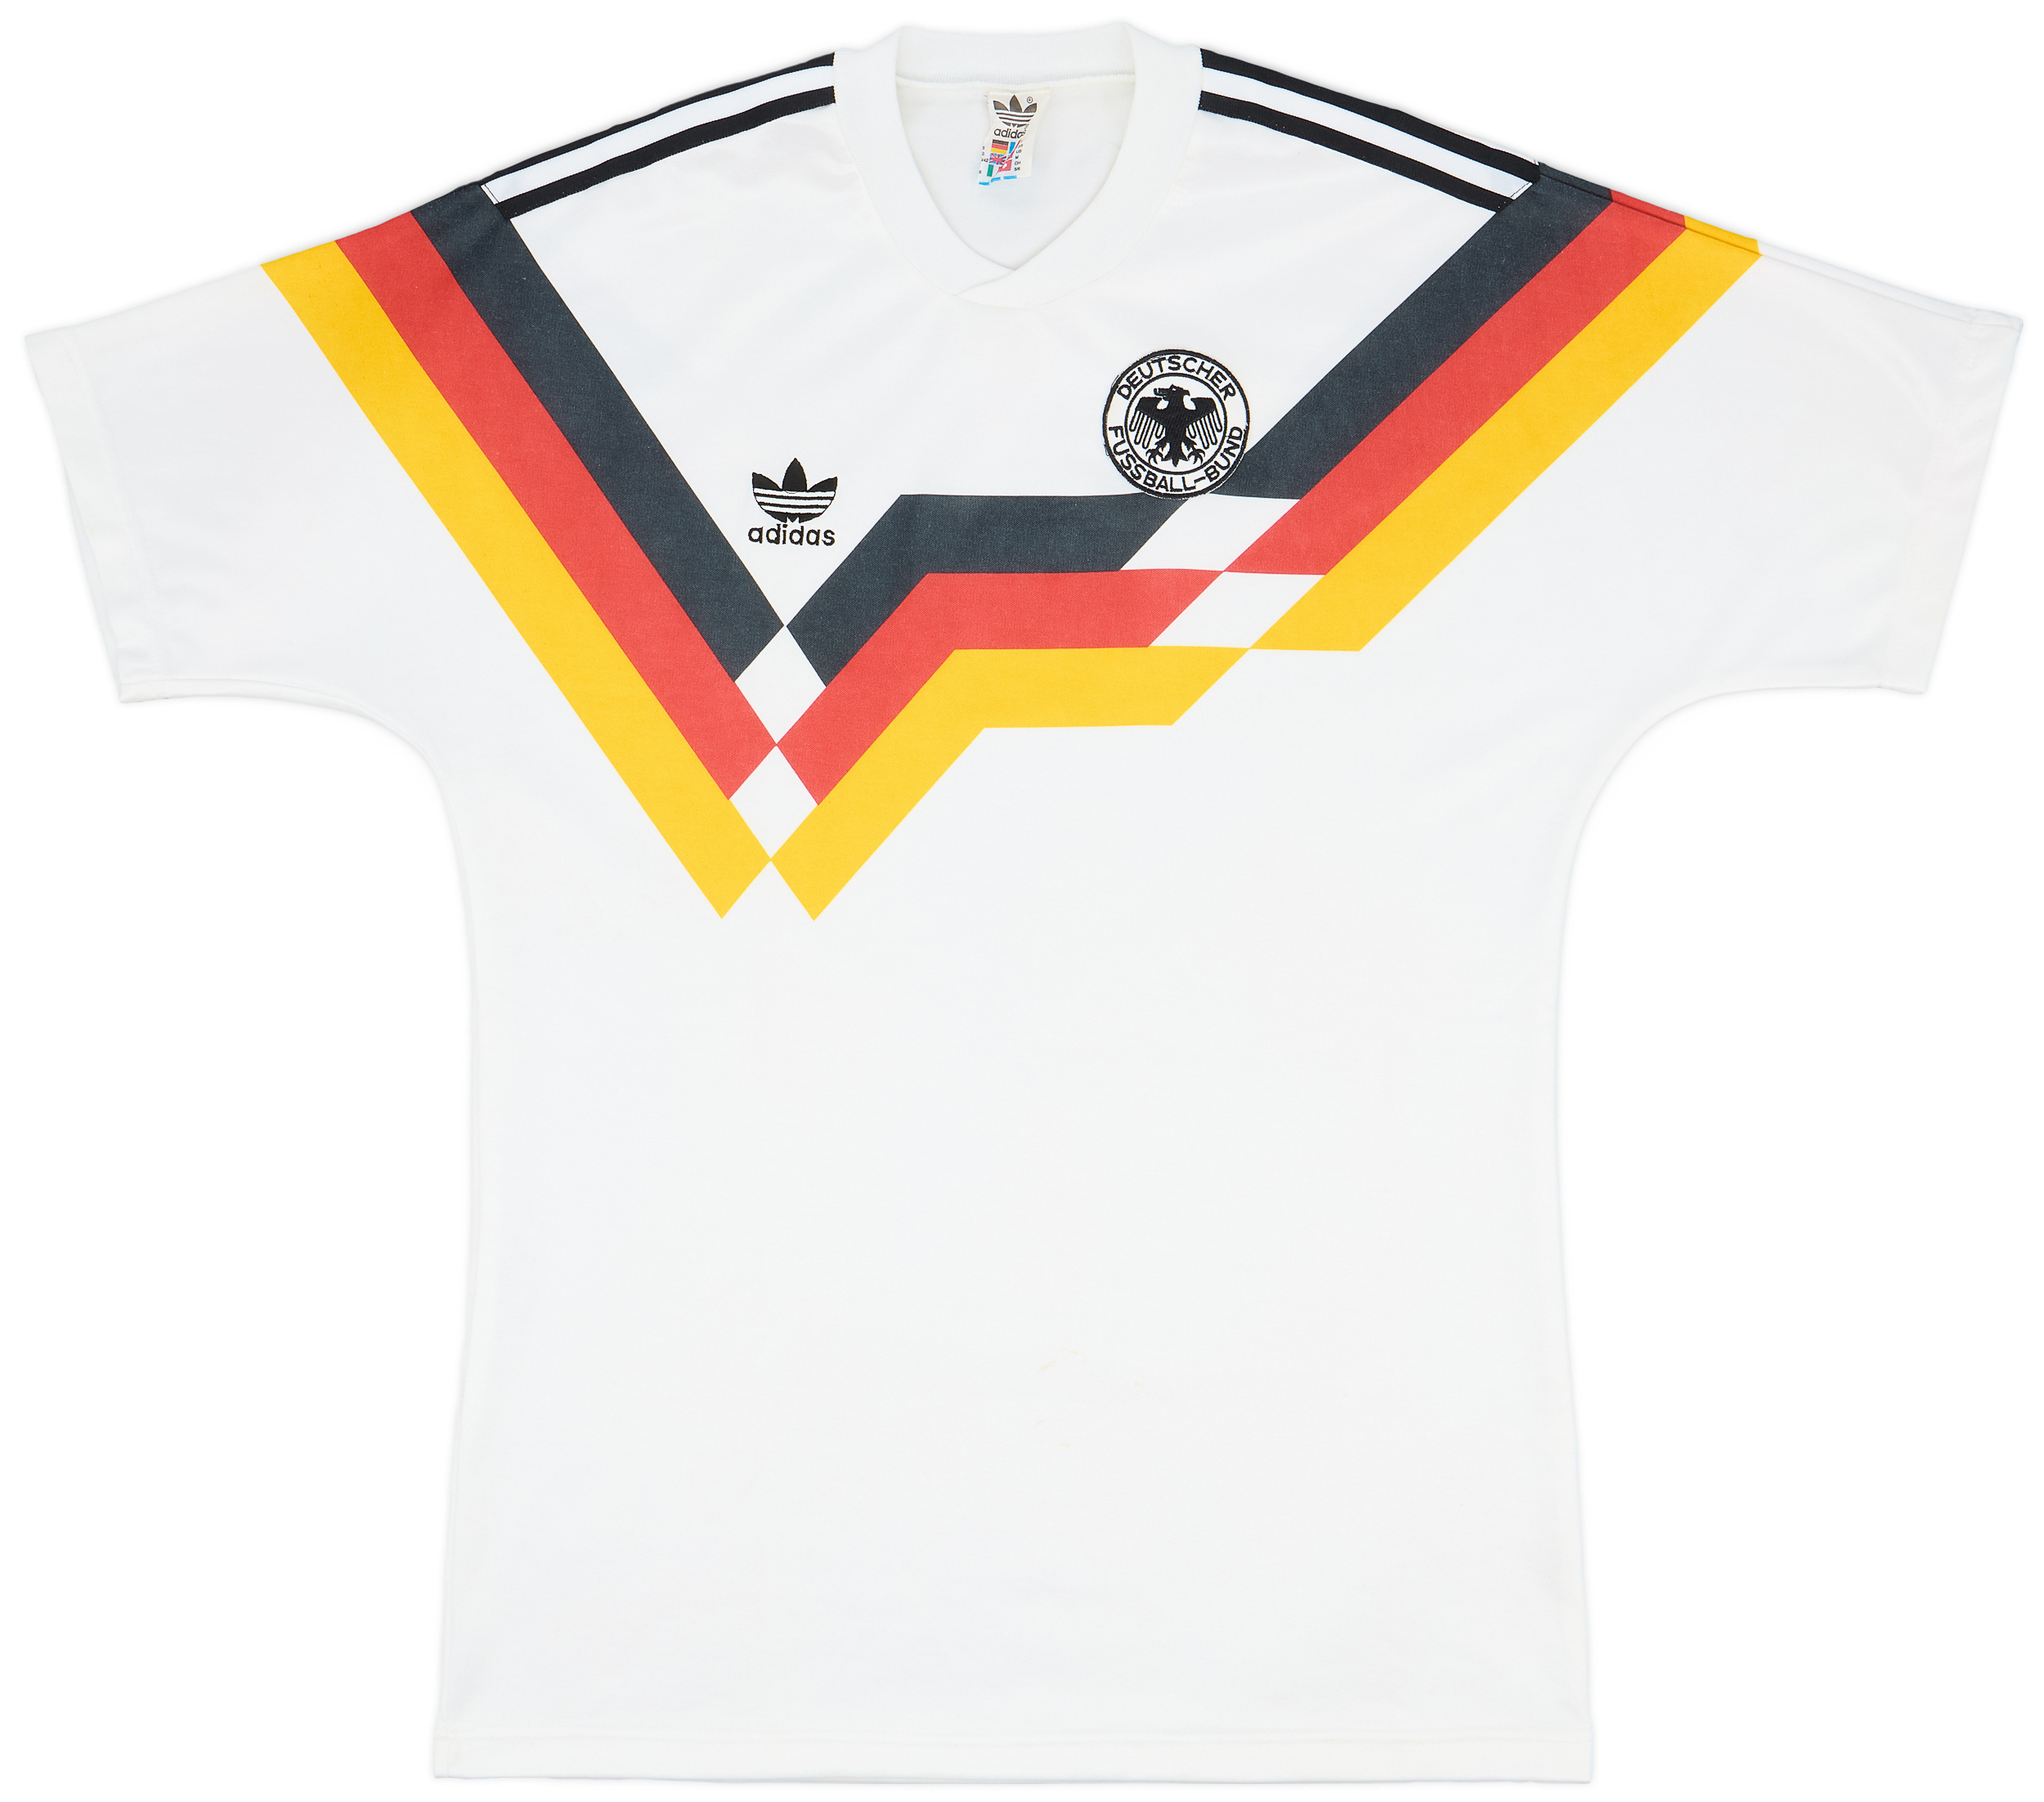 1988-90 West Germany Home Shirt - 8/10 - (/)